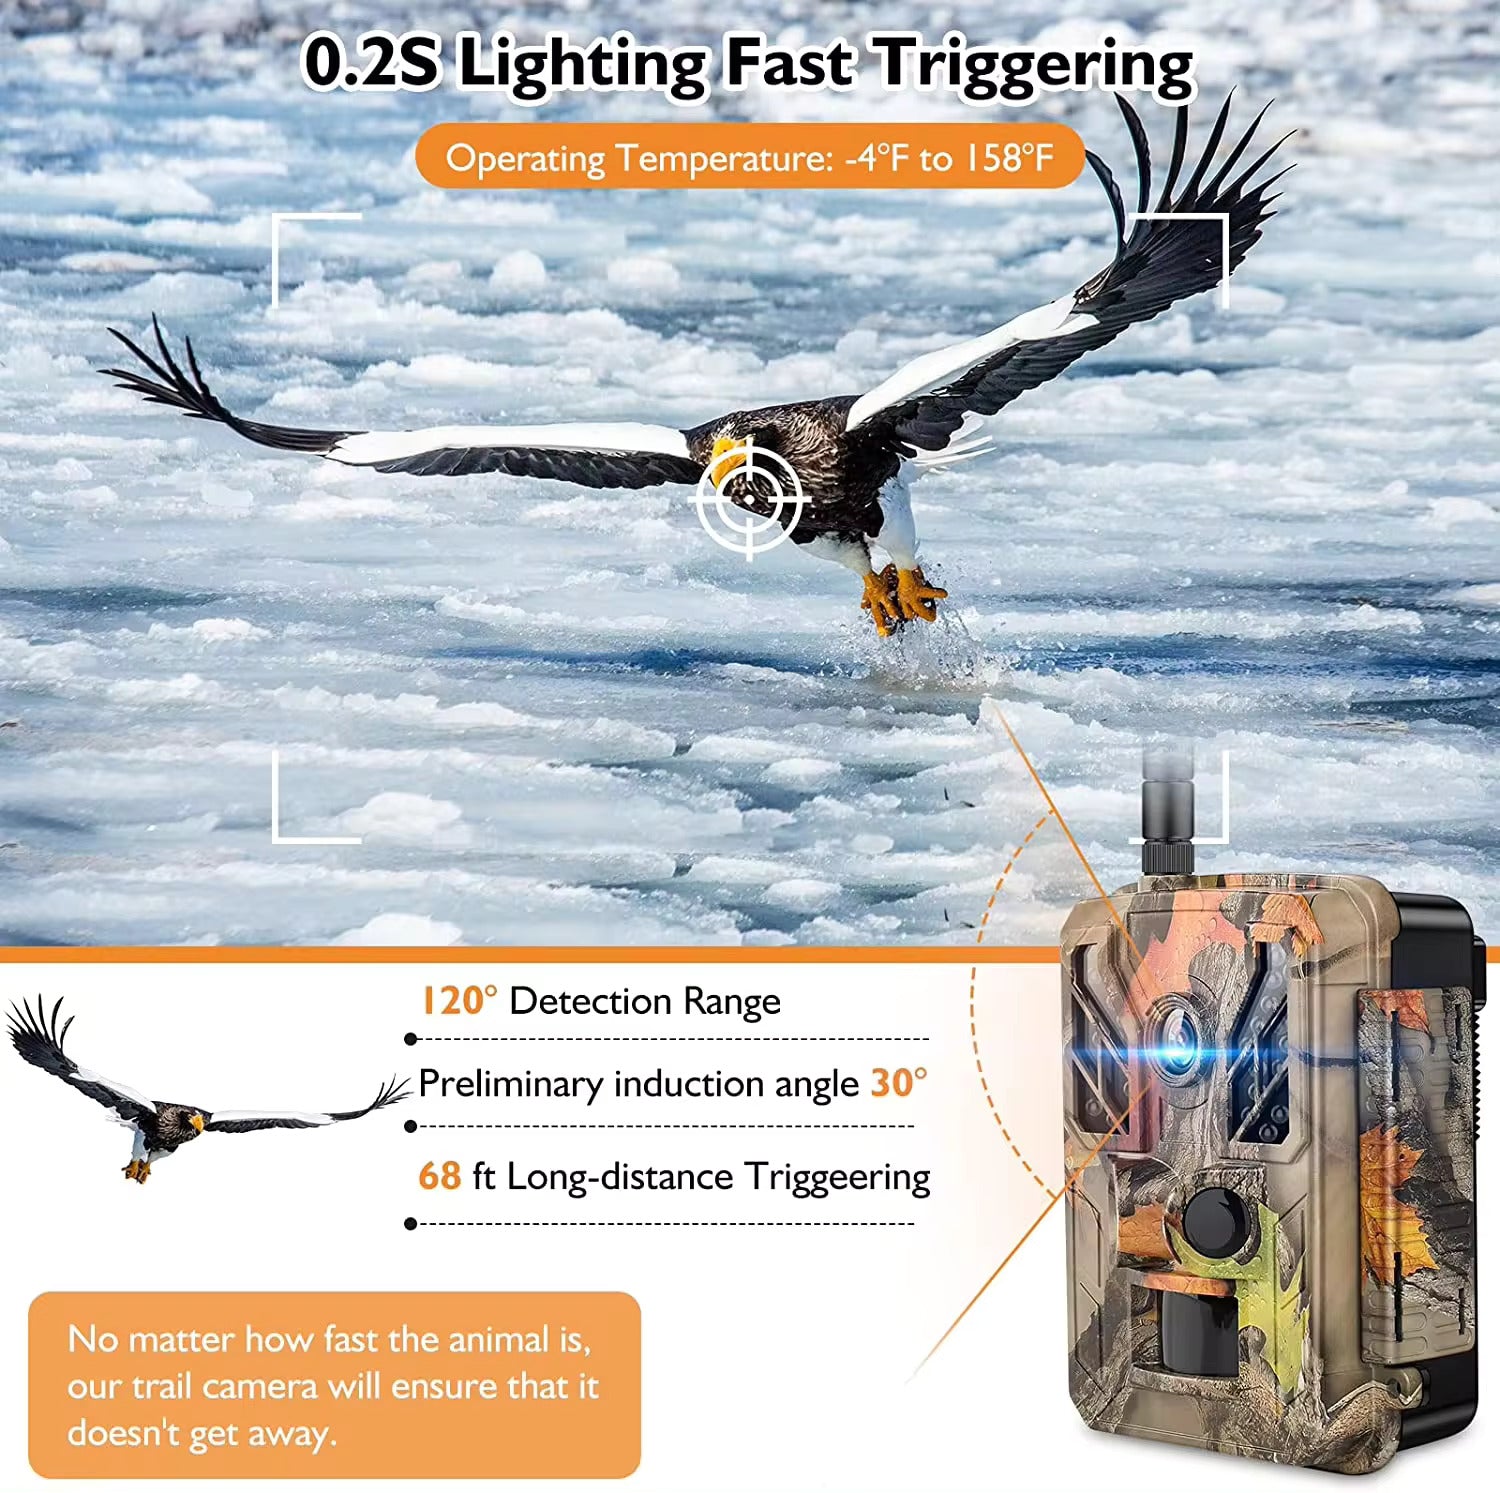 A hunting trail camera captures a majestic eagle in mid-flight with a 0.2S lightning-fast trigger speed, ensuring every rapid movement in the wilderness is recorded with precision.